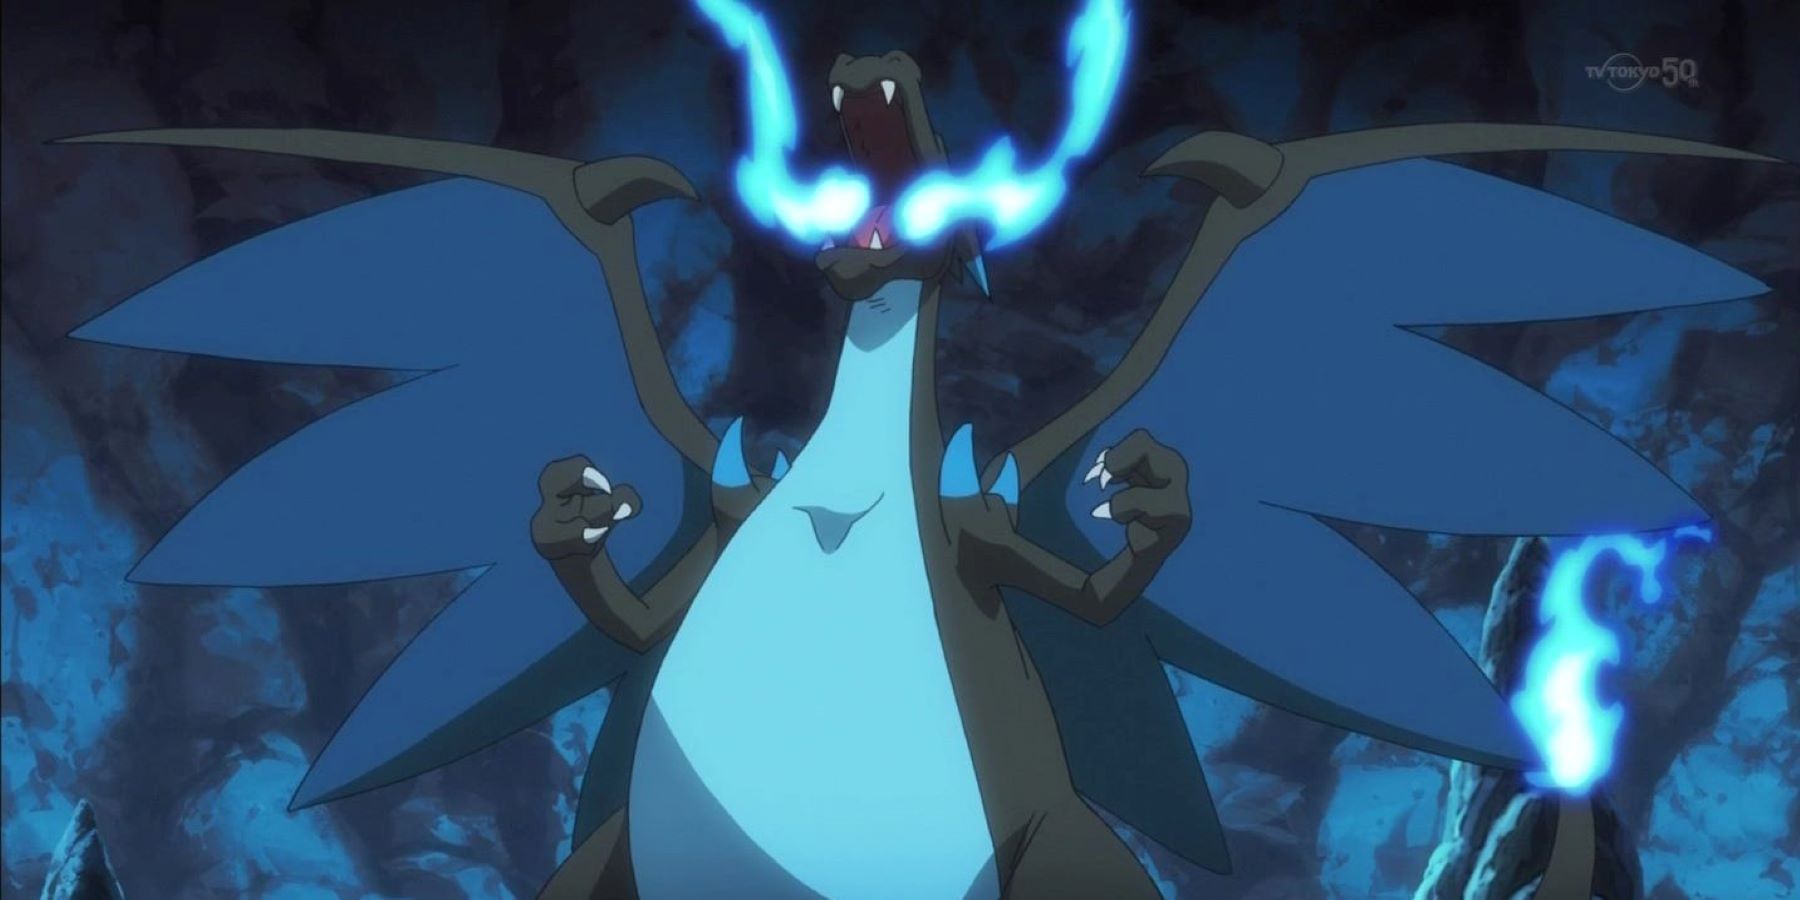 Red's Mega Charizard X getting ready to attack in a Pokemon anime